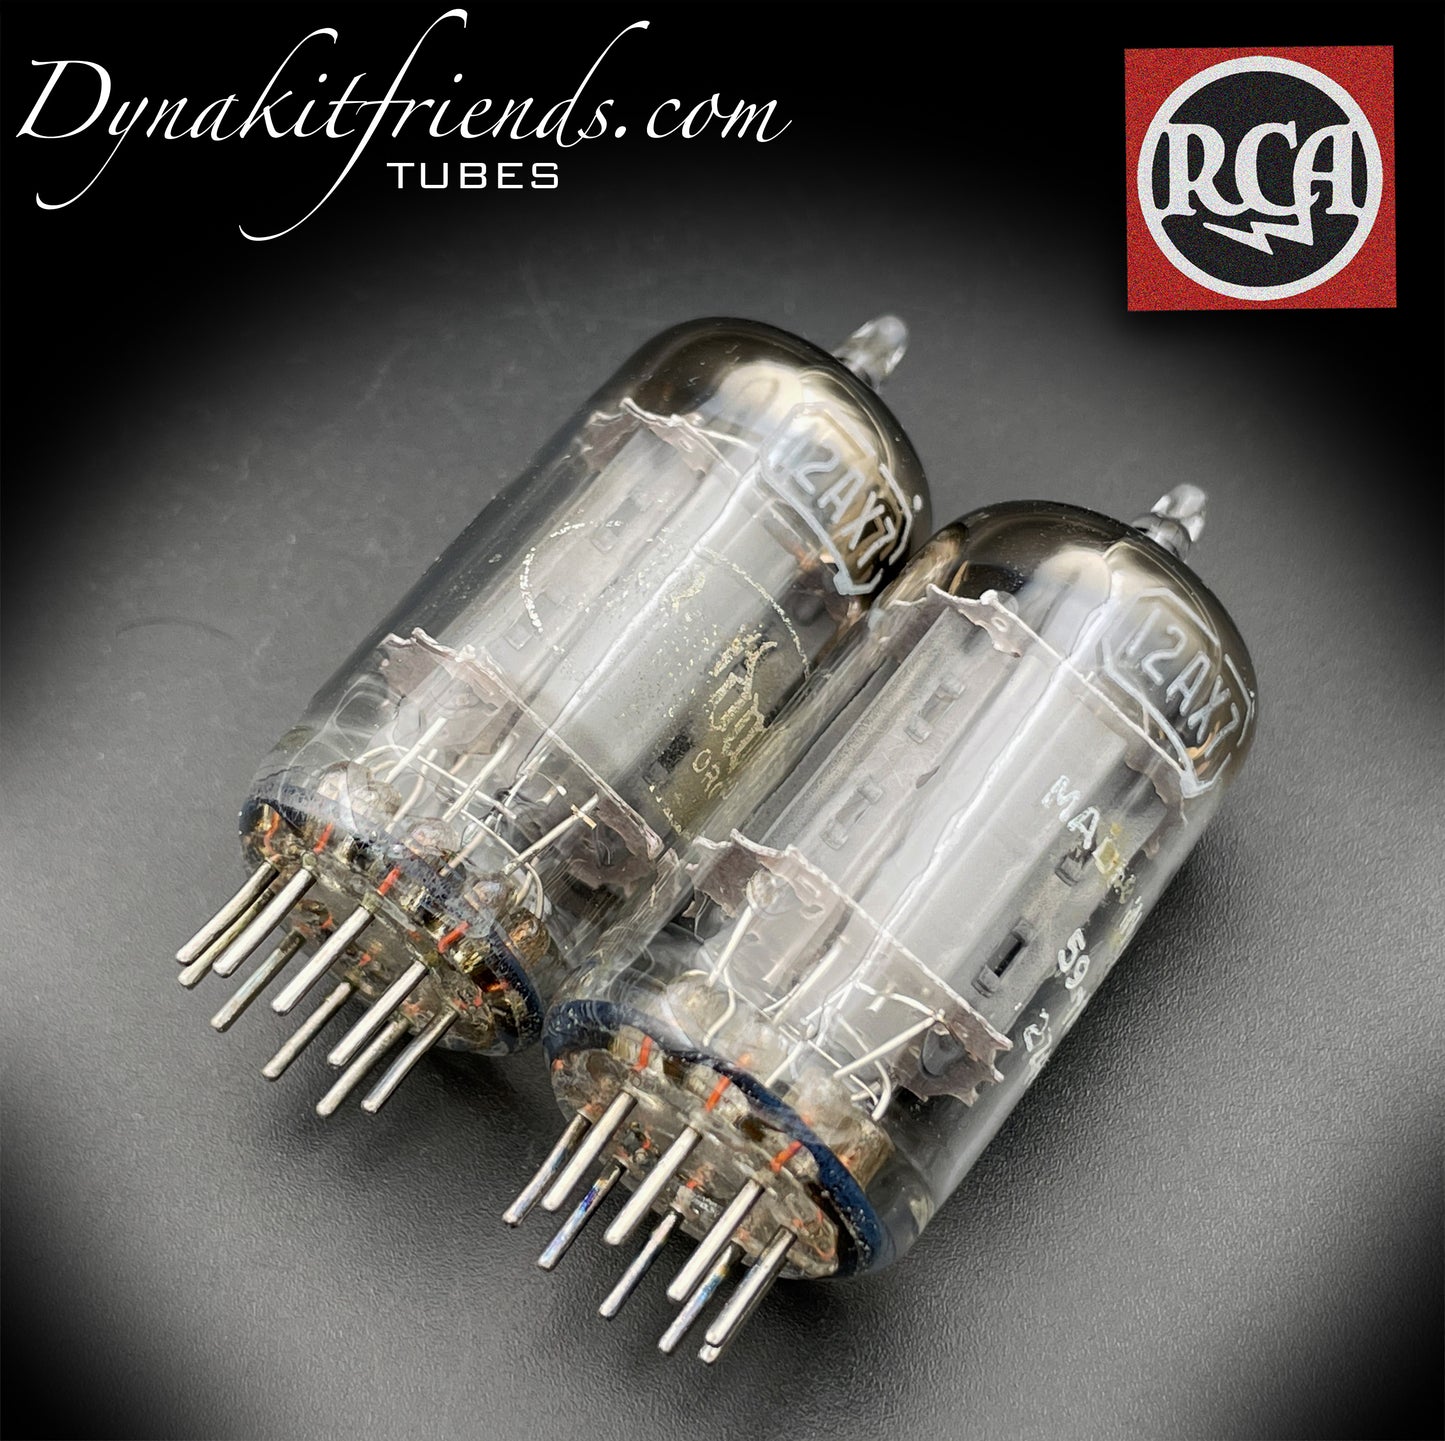 12AX7 ( ECC83 ) RCA Brand Baldwin Long Gray Plates Square Getter Matched Tubes MADE IN USA '59